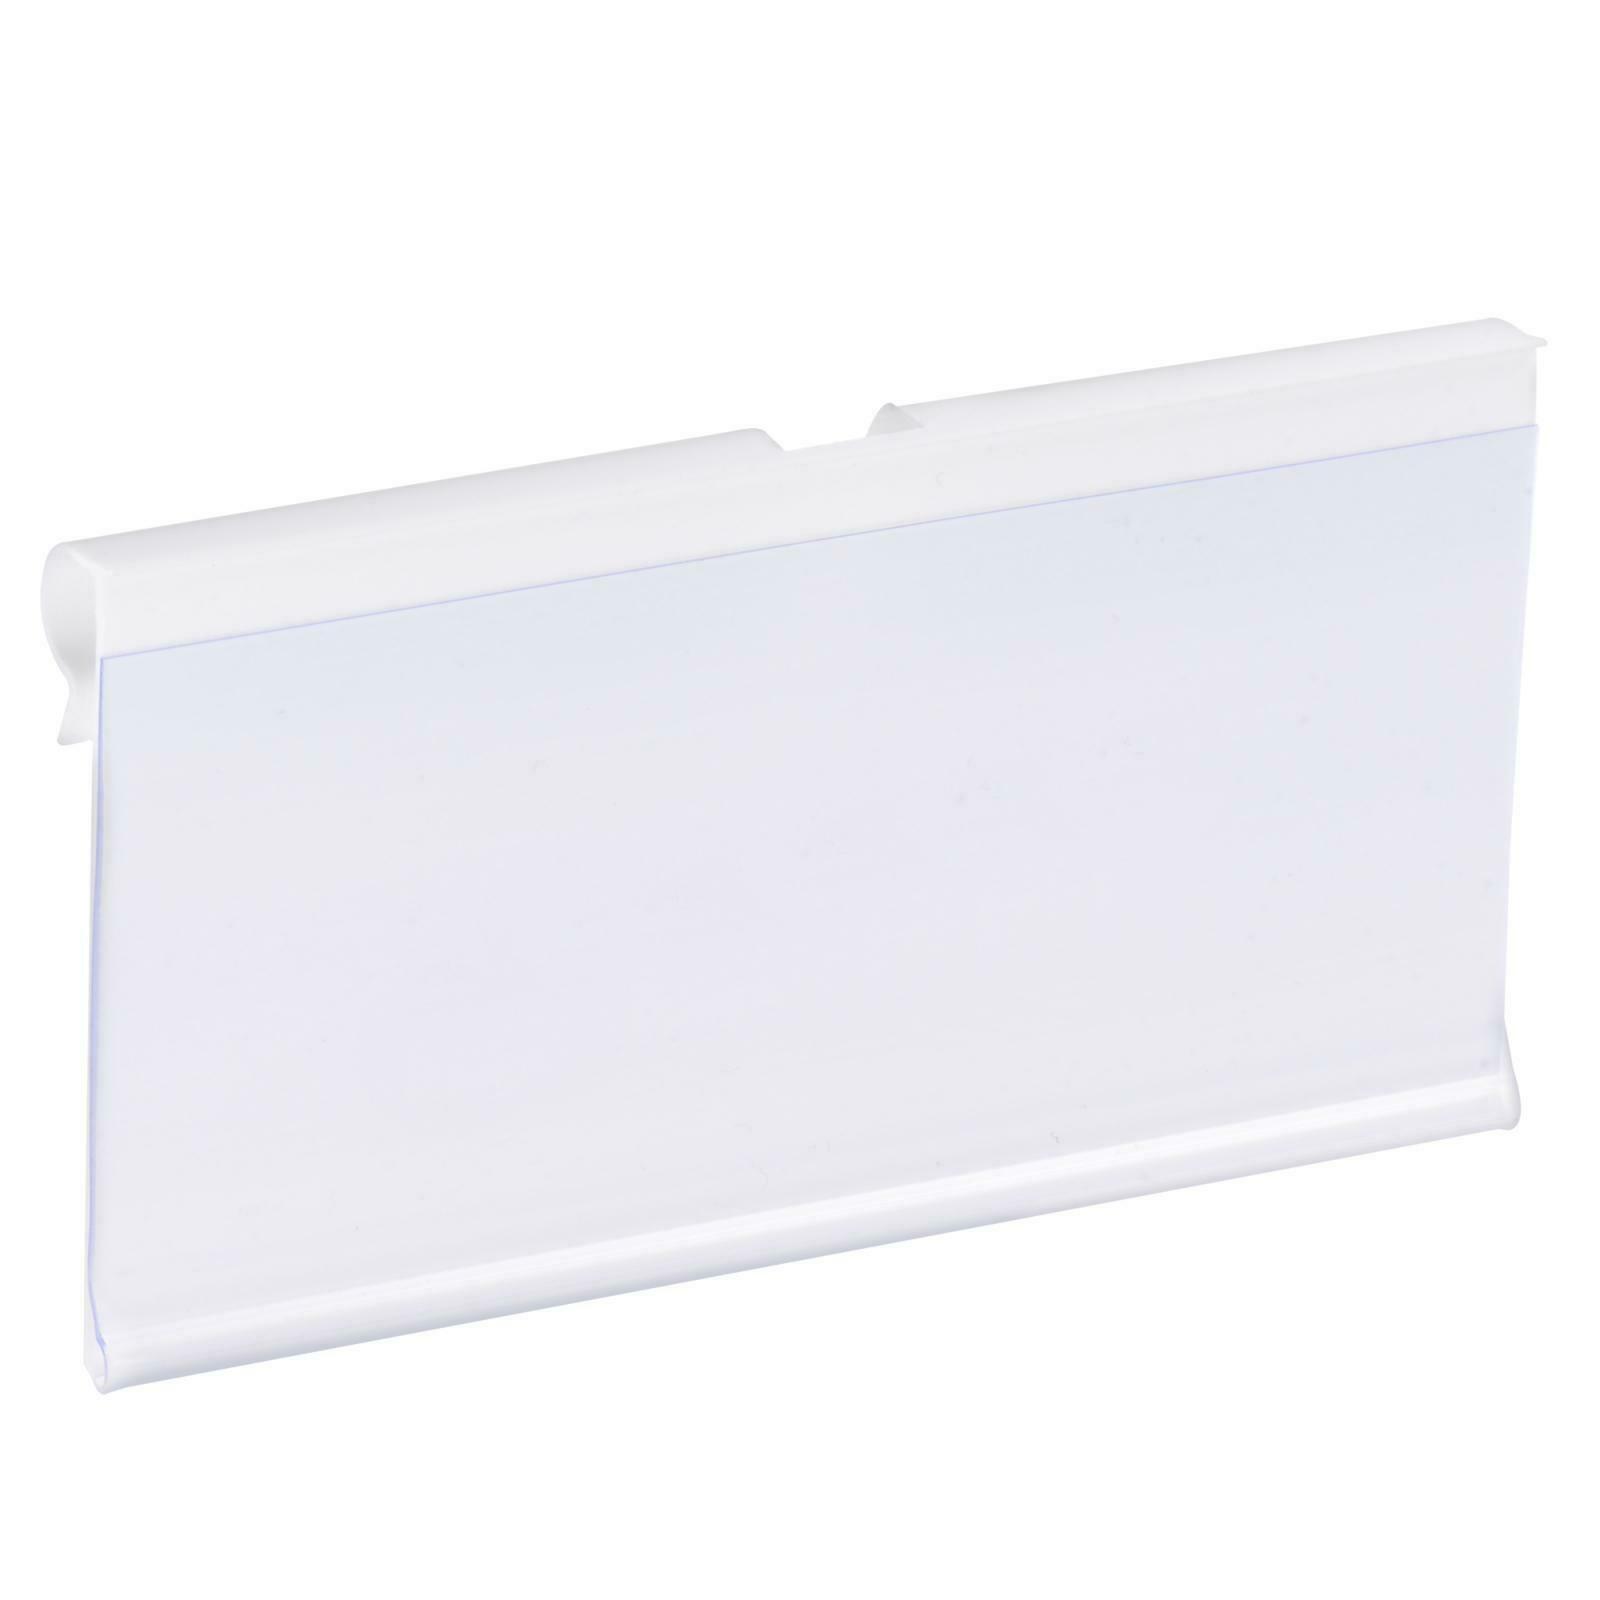 Label Holder 80x40mm Clear White Plastic For Wire Shelf, Pack Of 30